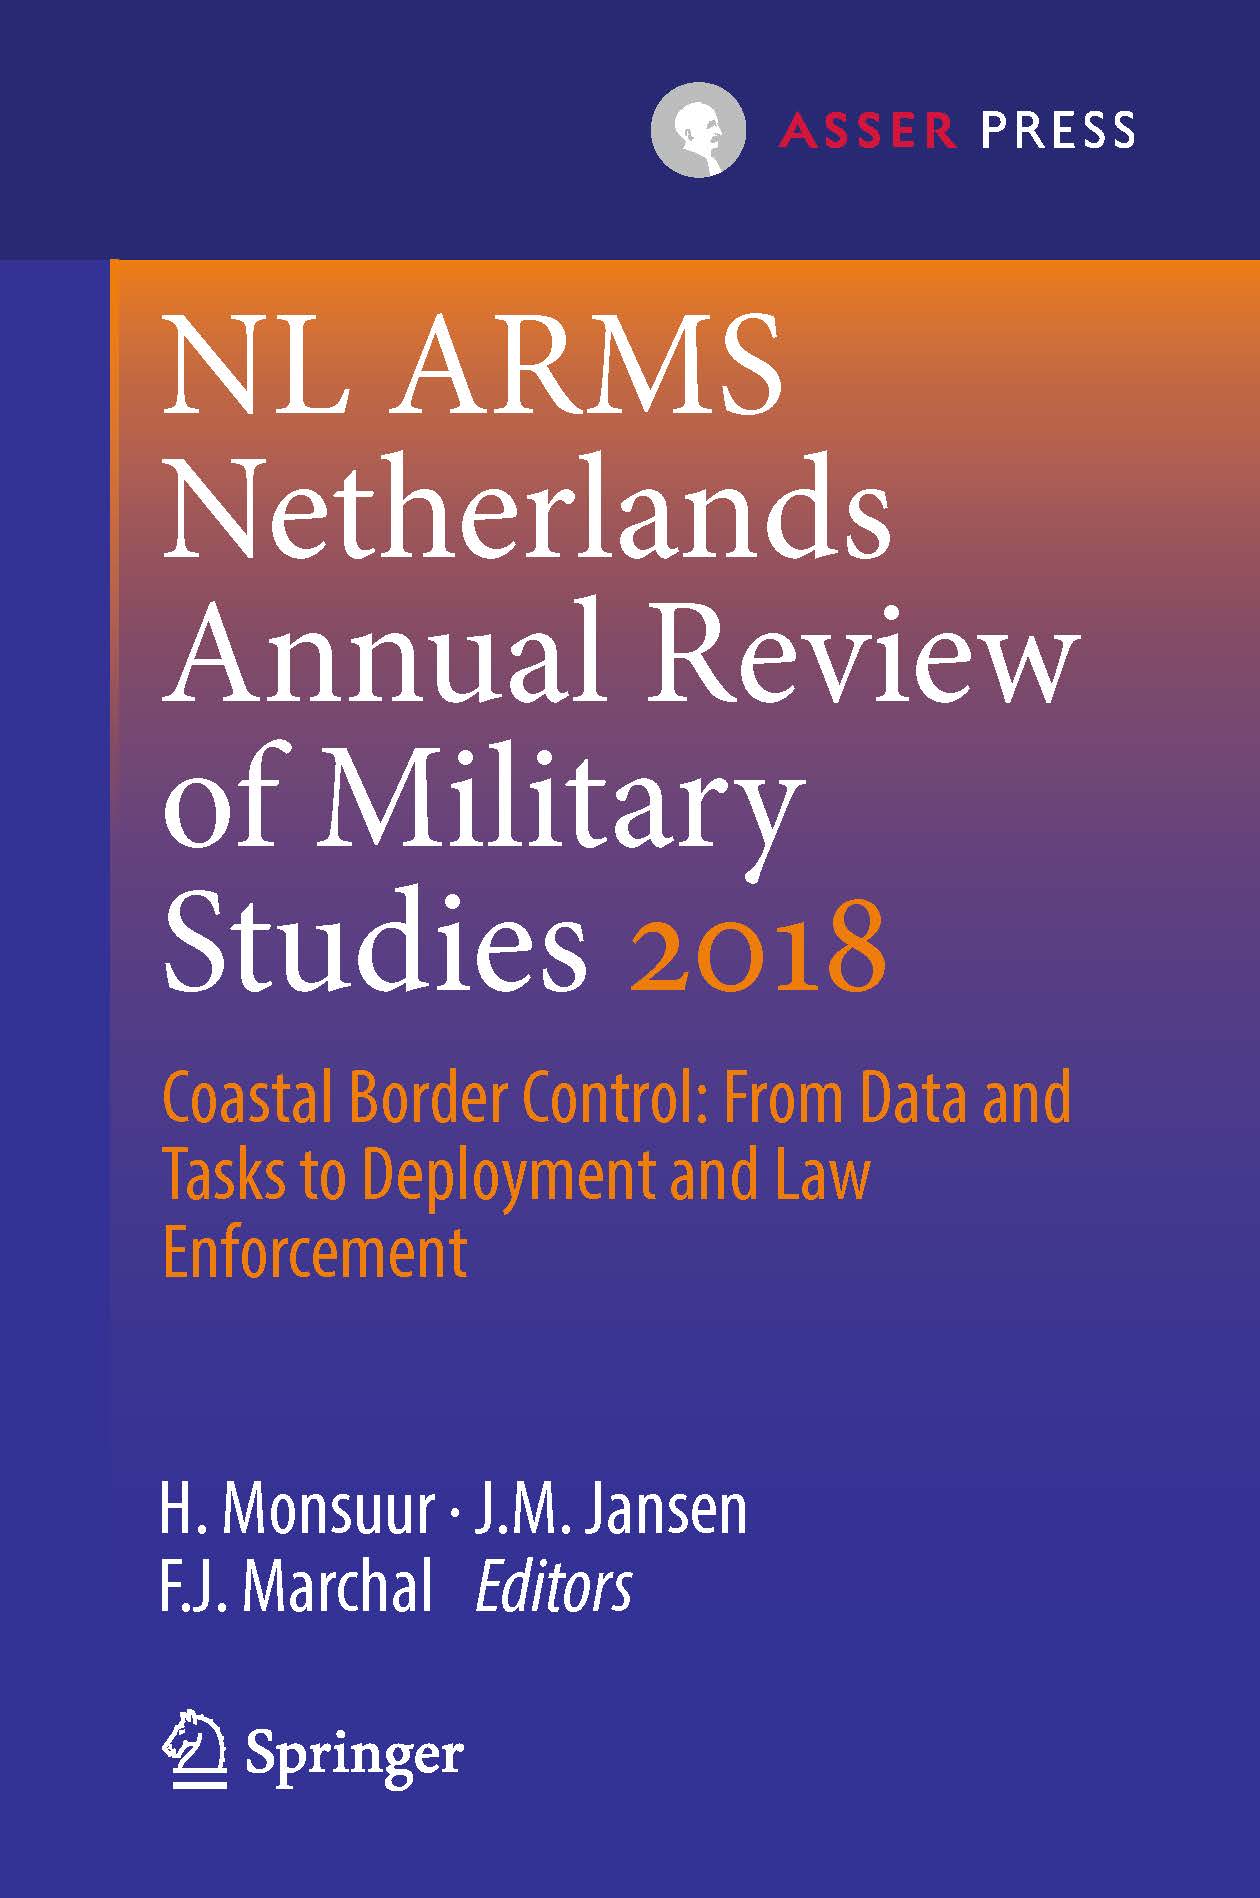 NL ARMS 2018 - Coastal Border Control: From Data and Tasks to Deployment and Law Enforcement